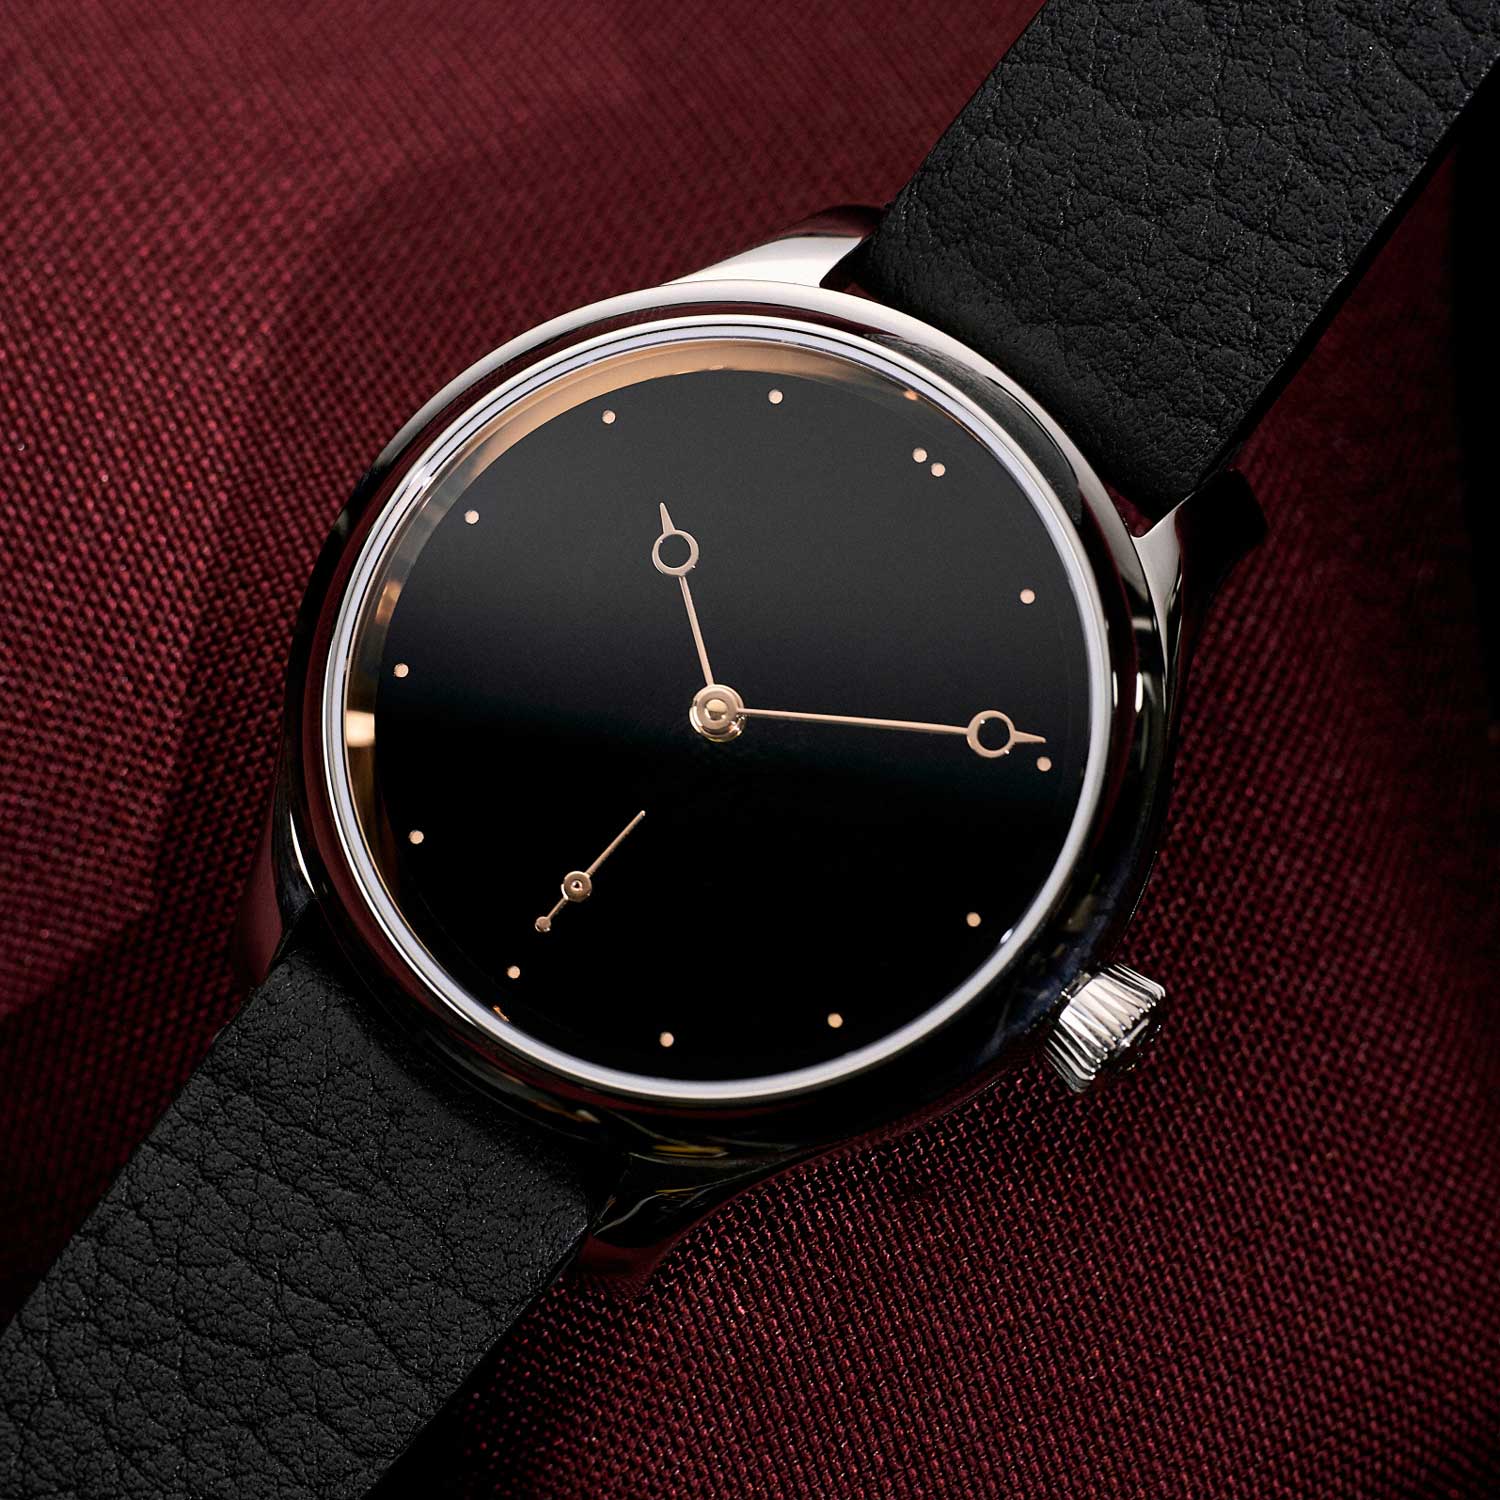 H. Moser & Cie x The Armoury Endeavour Small Seconds Total Eclipse in steel with red gold inner bezel